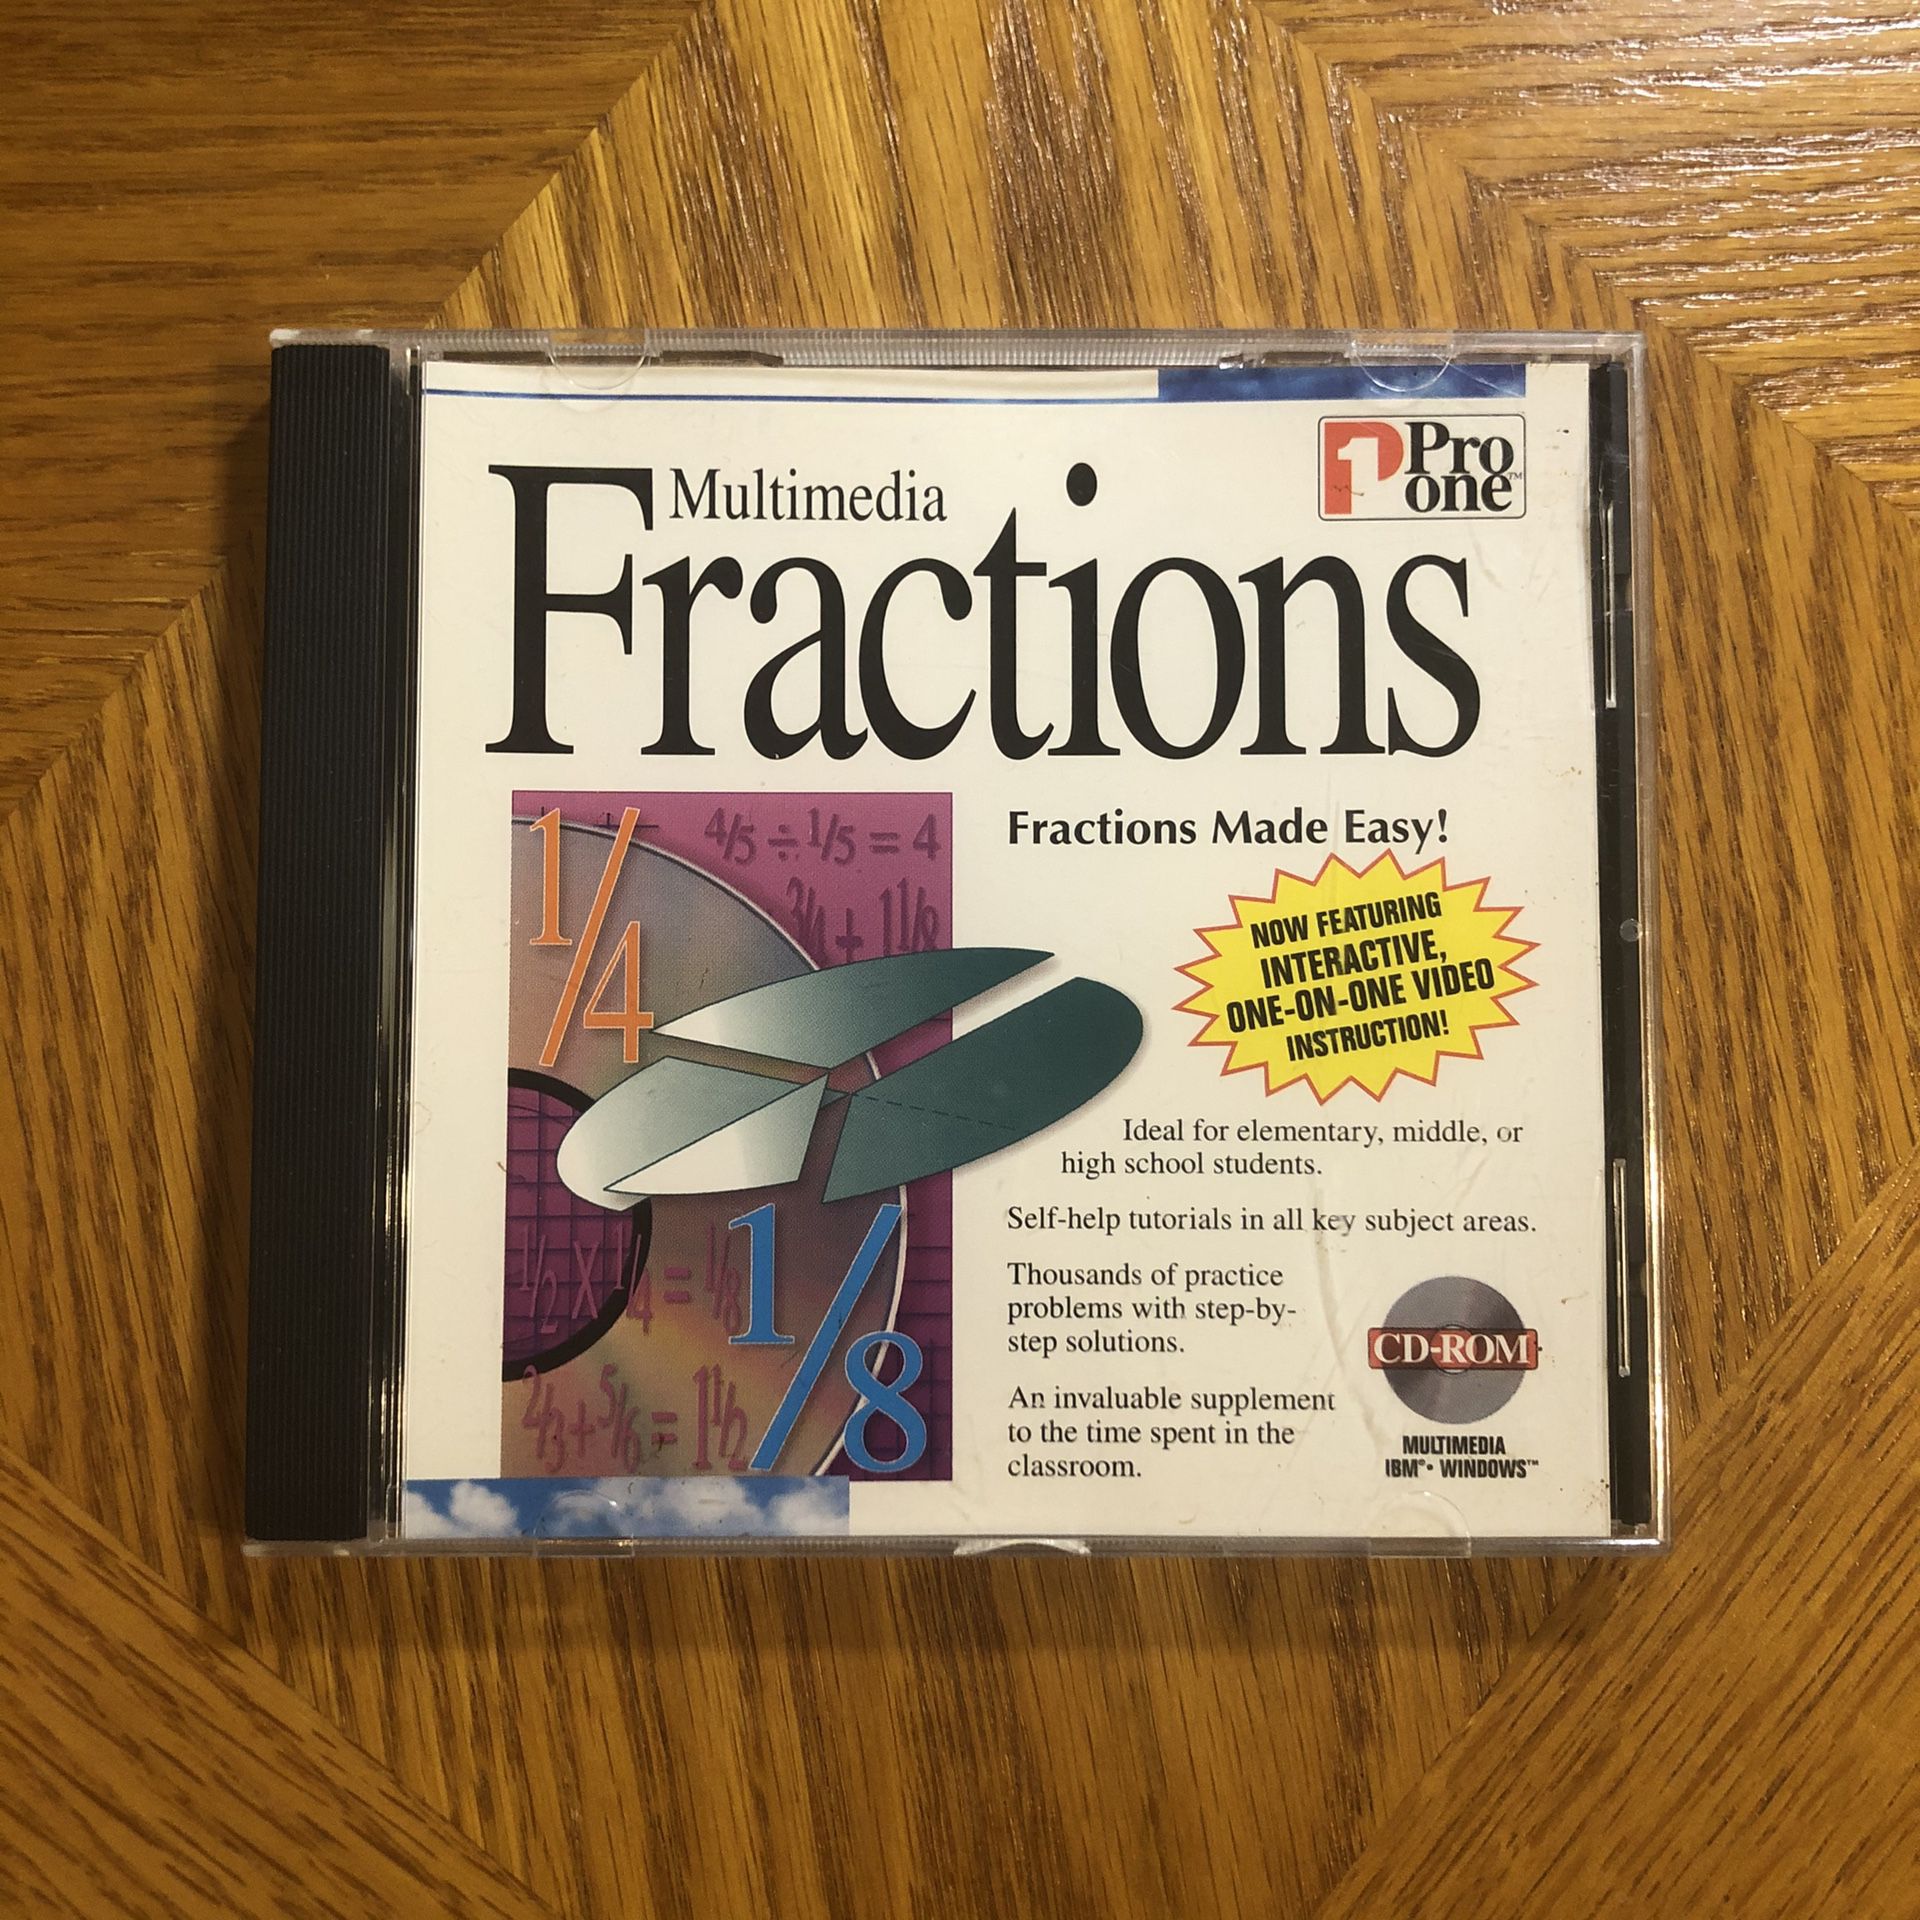 Pro One Multimedia Fractions (PC)